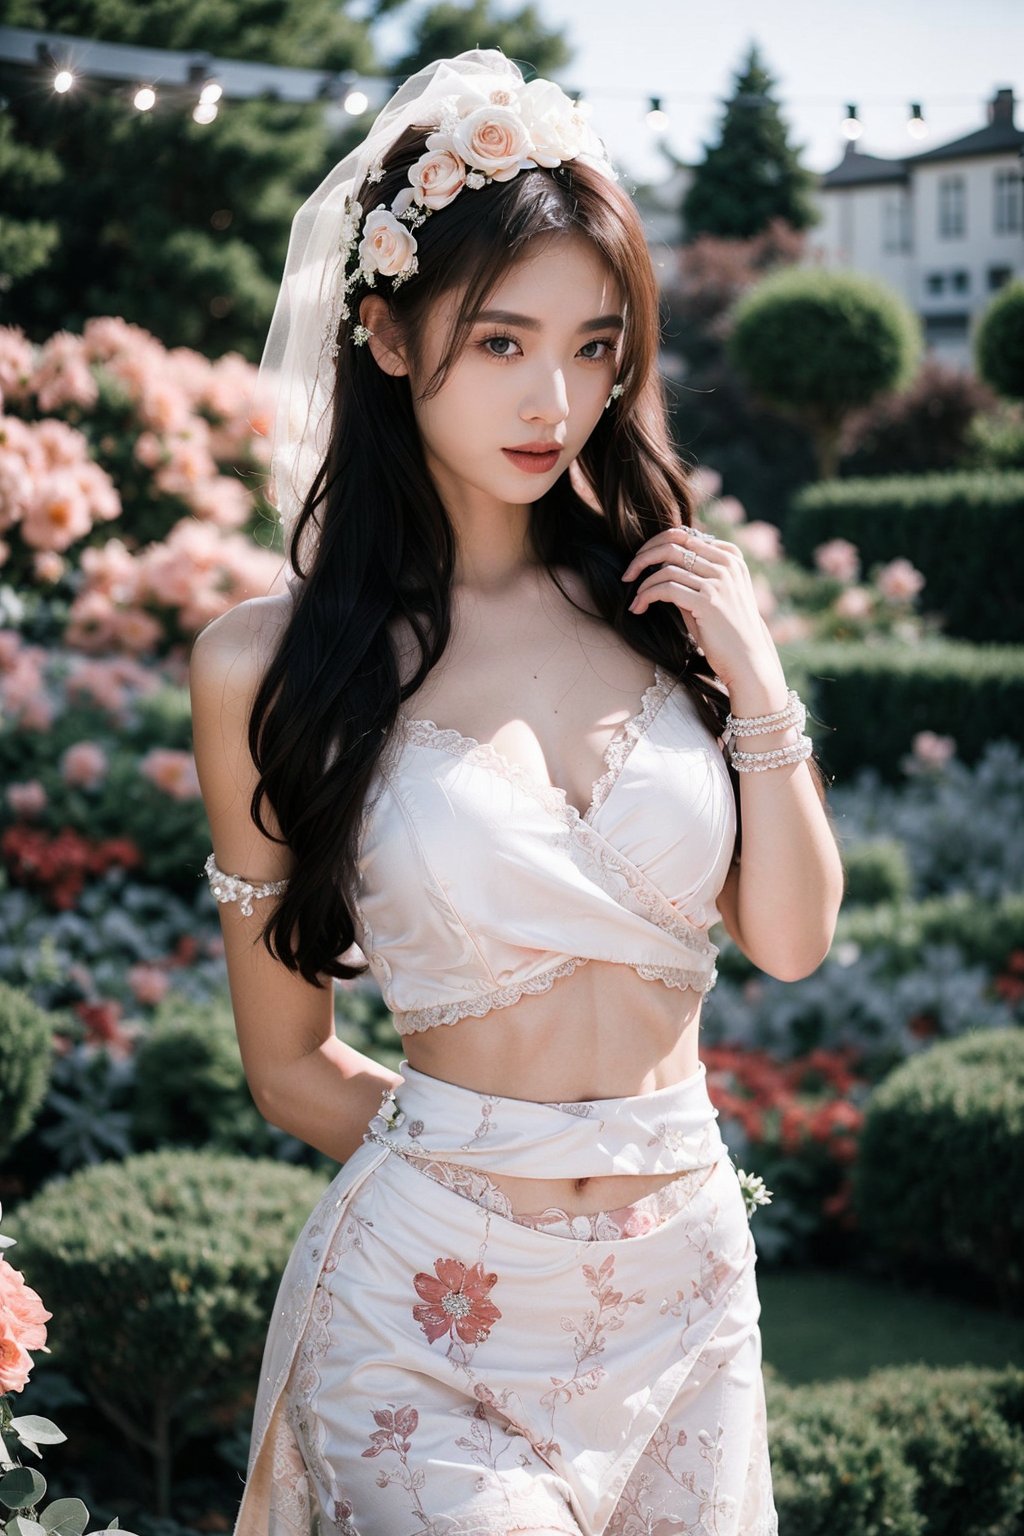 (Romantic floral wrap lace top:1.4), (Flowy Midi skirt:1.4), (Delicate Beaded bracelets:1.3), (Garden wedding background:1.5),
1girl, solo, pink hair, outdoors, streets, street, city,
chinese woman, lip, brown eyes,  finelydetailedeyes, She has exquisite facial features and delicate skin, Rich and realistic skin texture, fine hands, the magnificent red evening dress was adorned with sparkling jewelry,